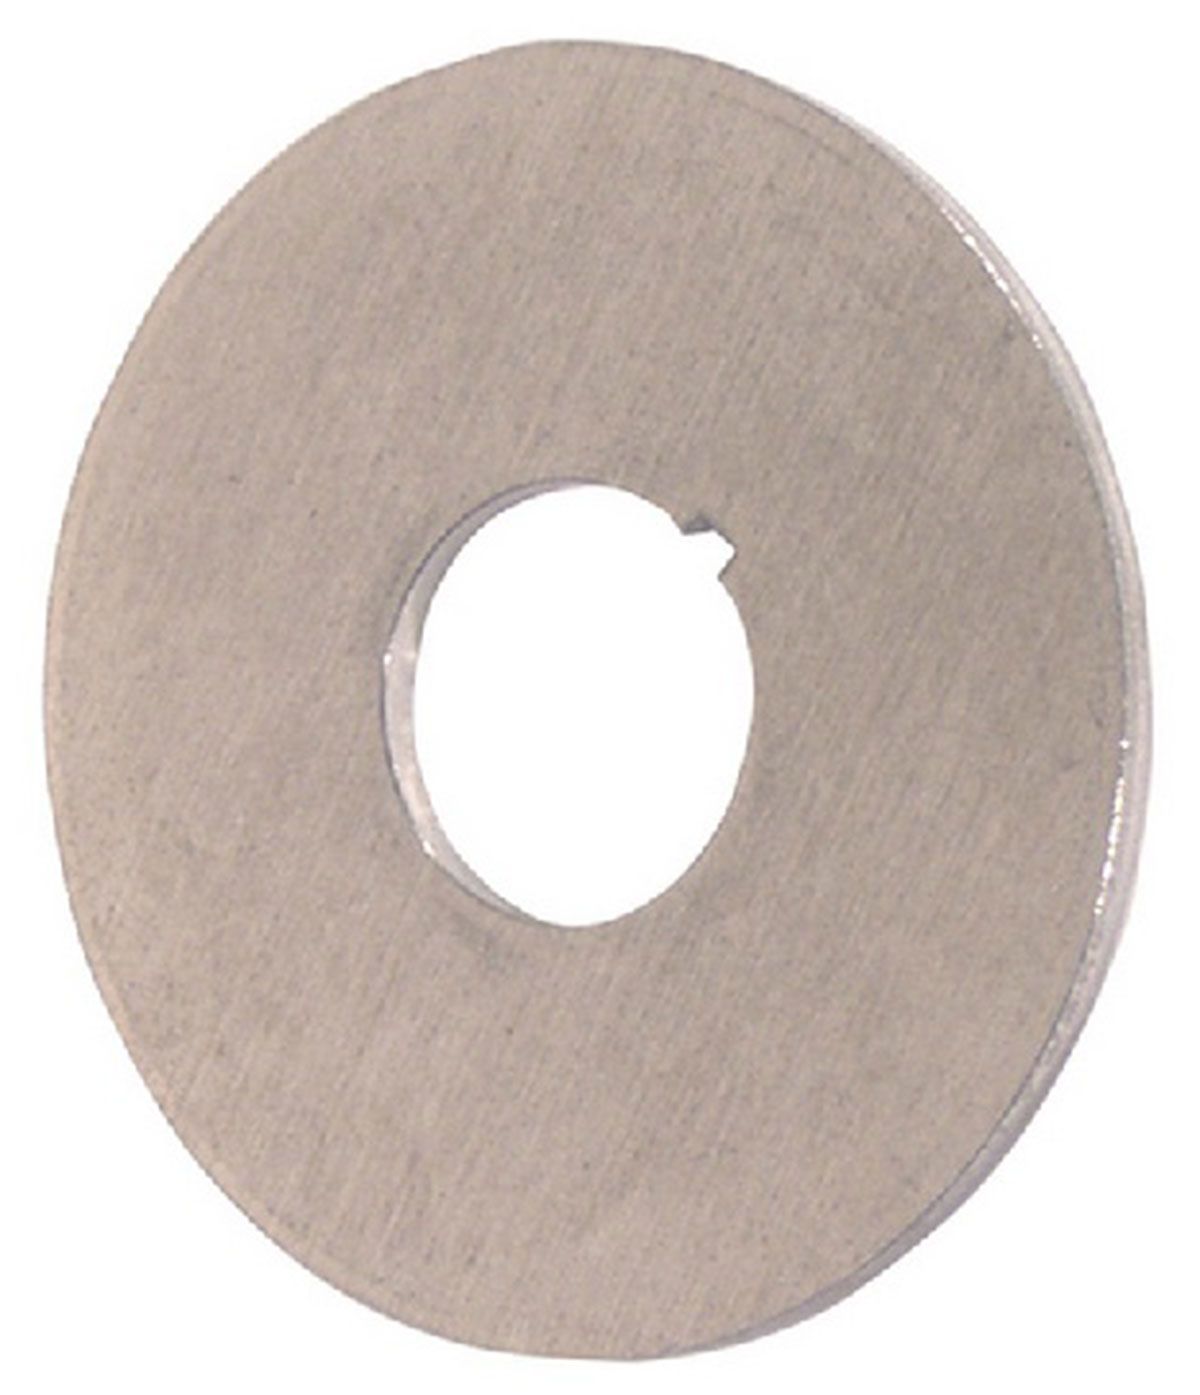 PFS05-0737 - PETERSON MANDREL GUIDE WASHER